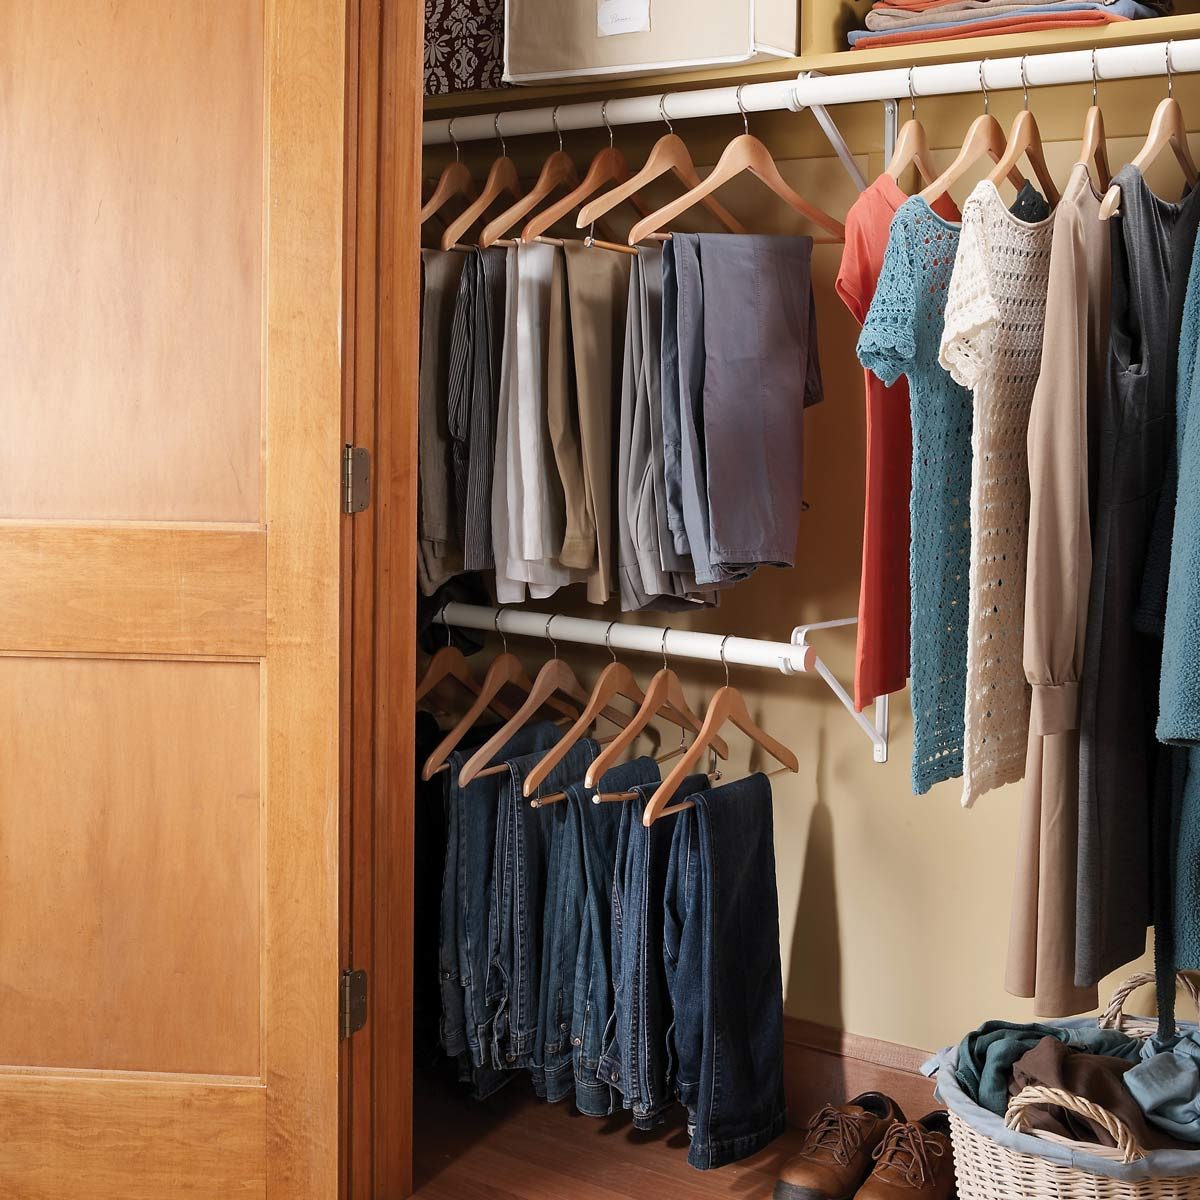 10 Simple Life Hacks for Organizing Your Home